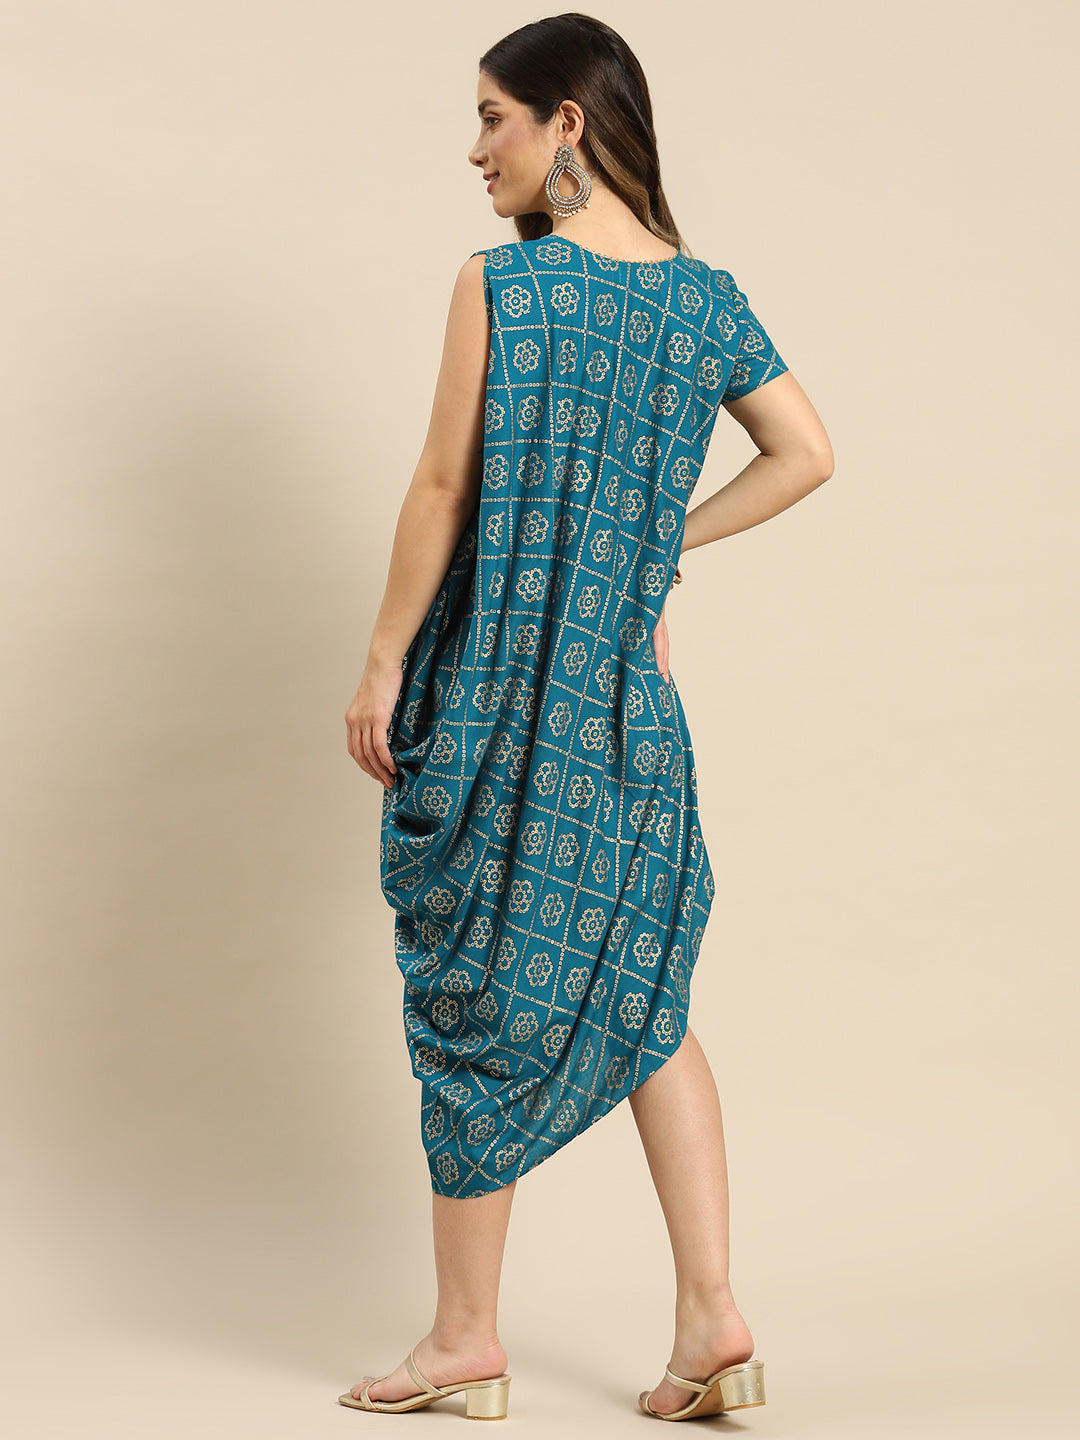 One side cowl asymettric dress with side